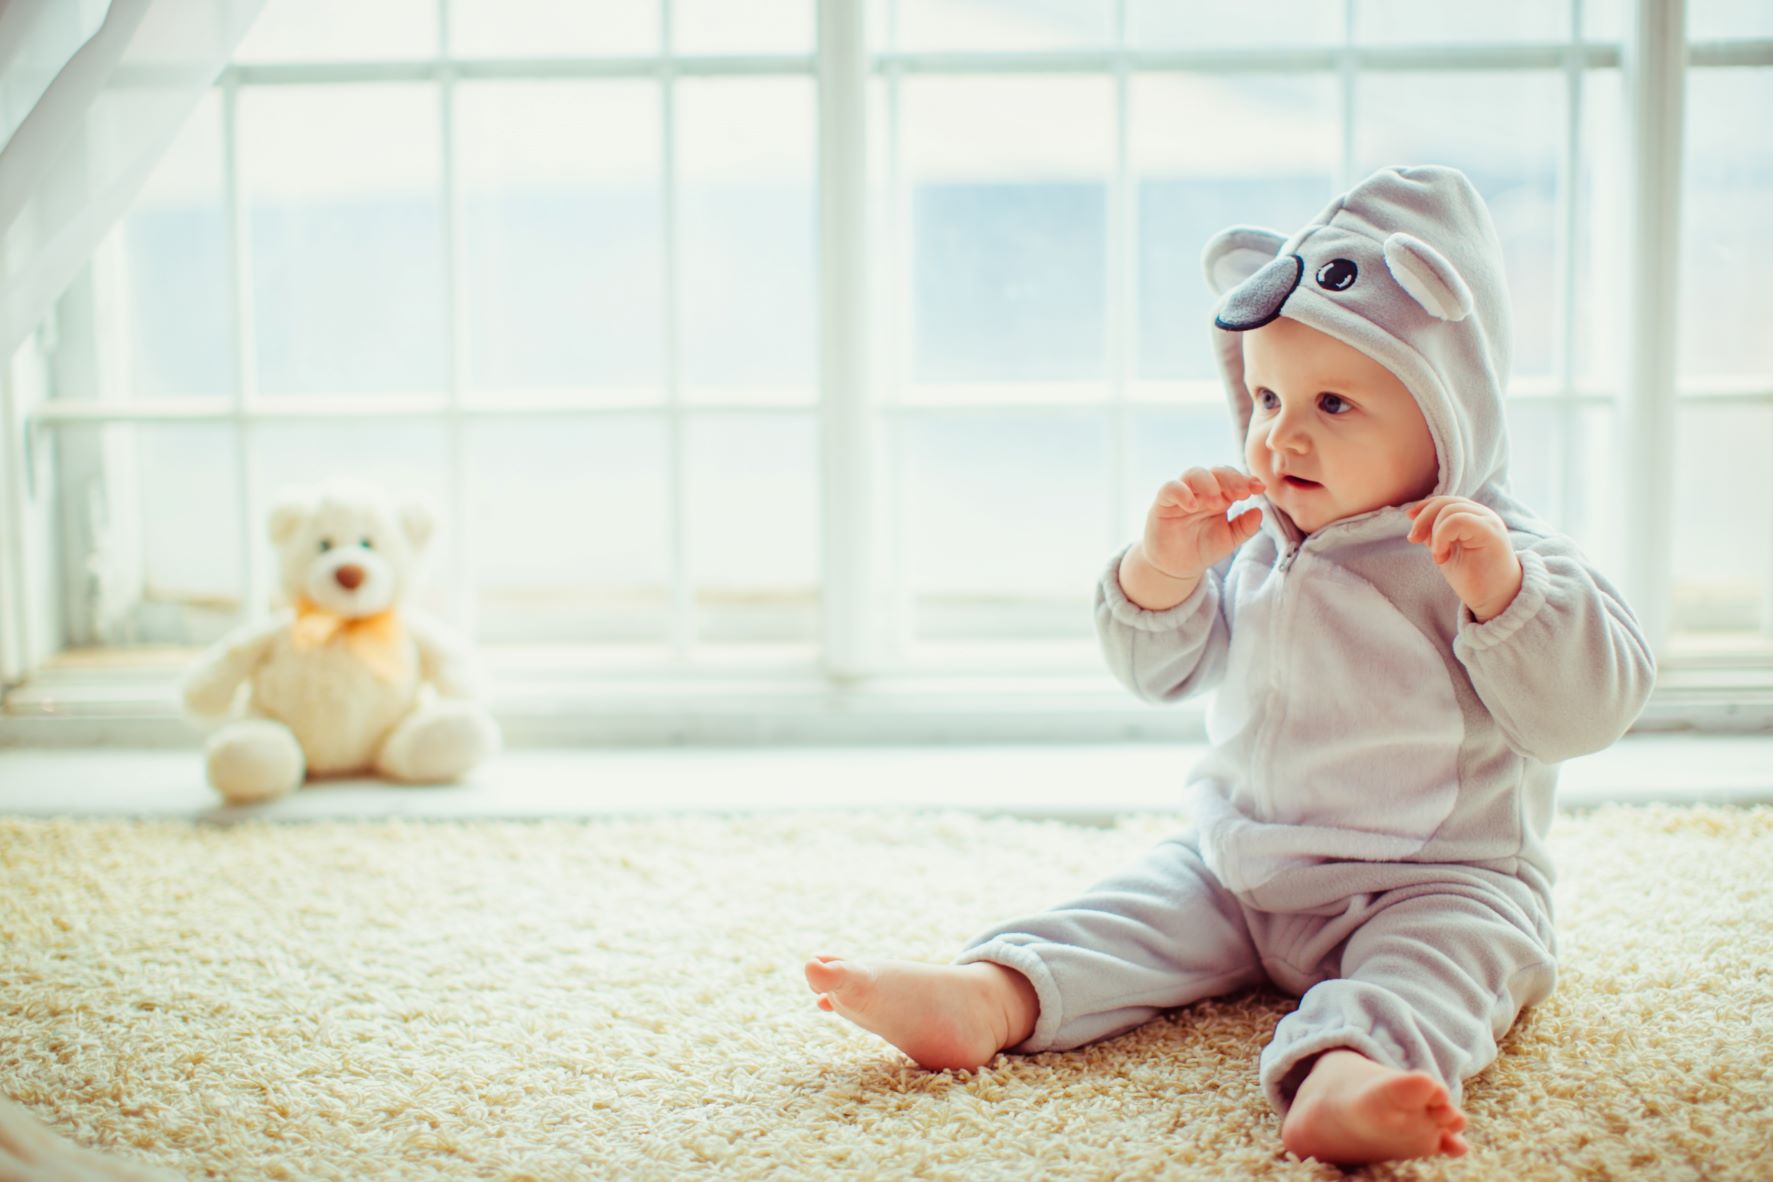 Baby Clothing Guide: How to Choose the Perfect Outfit for Your Little One - Comfort, Style, and Practicality Explained